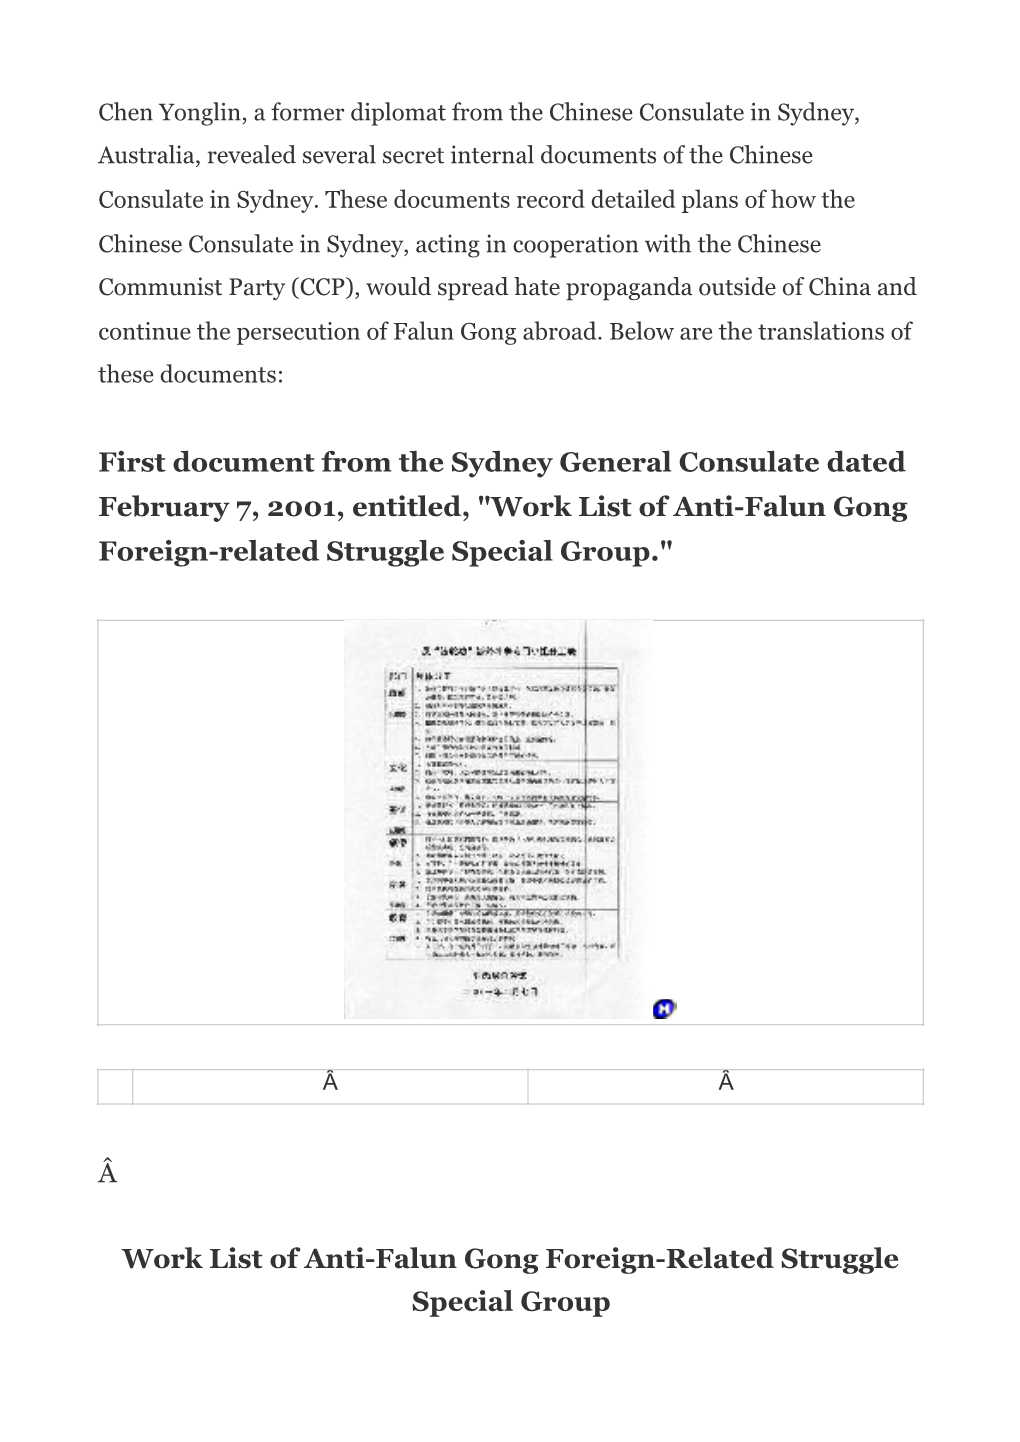 Work List of Anti-Falun Gong Foreign-Related Struggle Special Group."